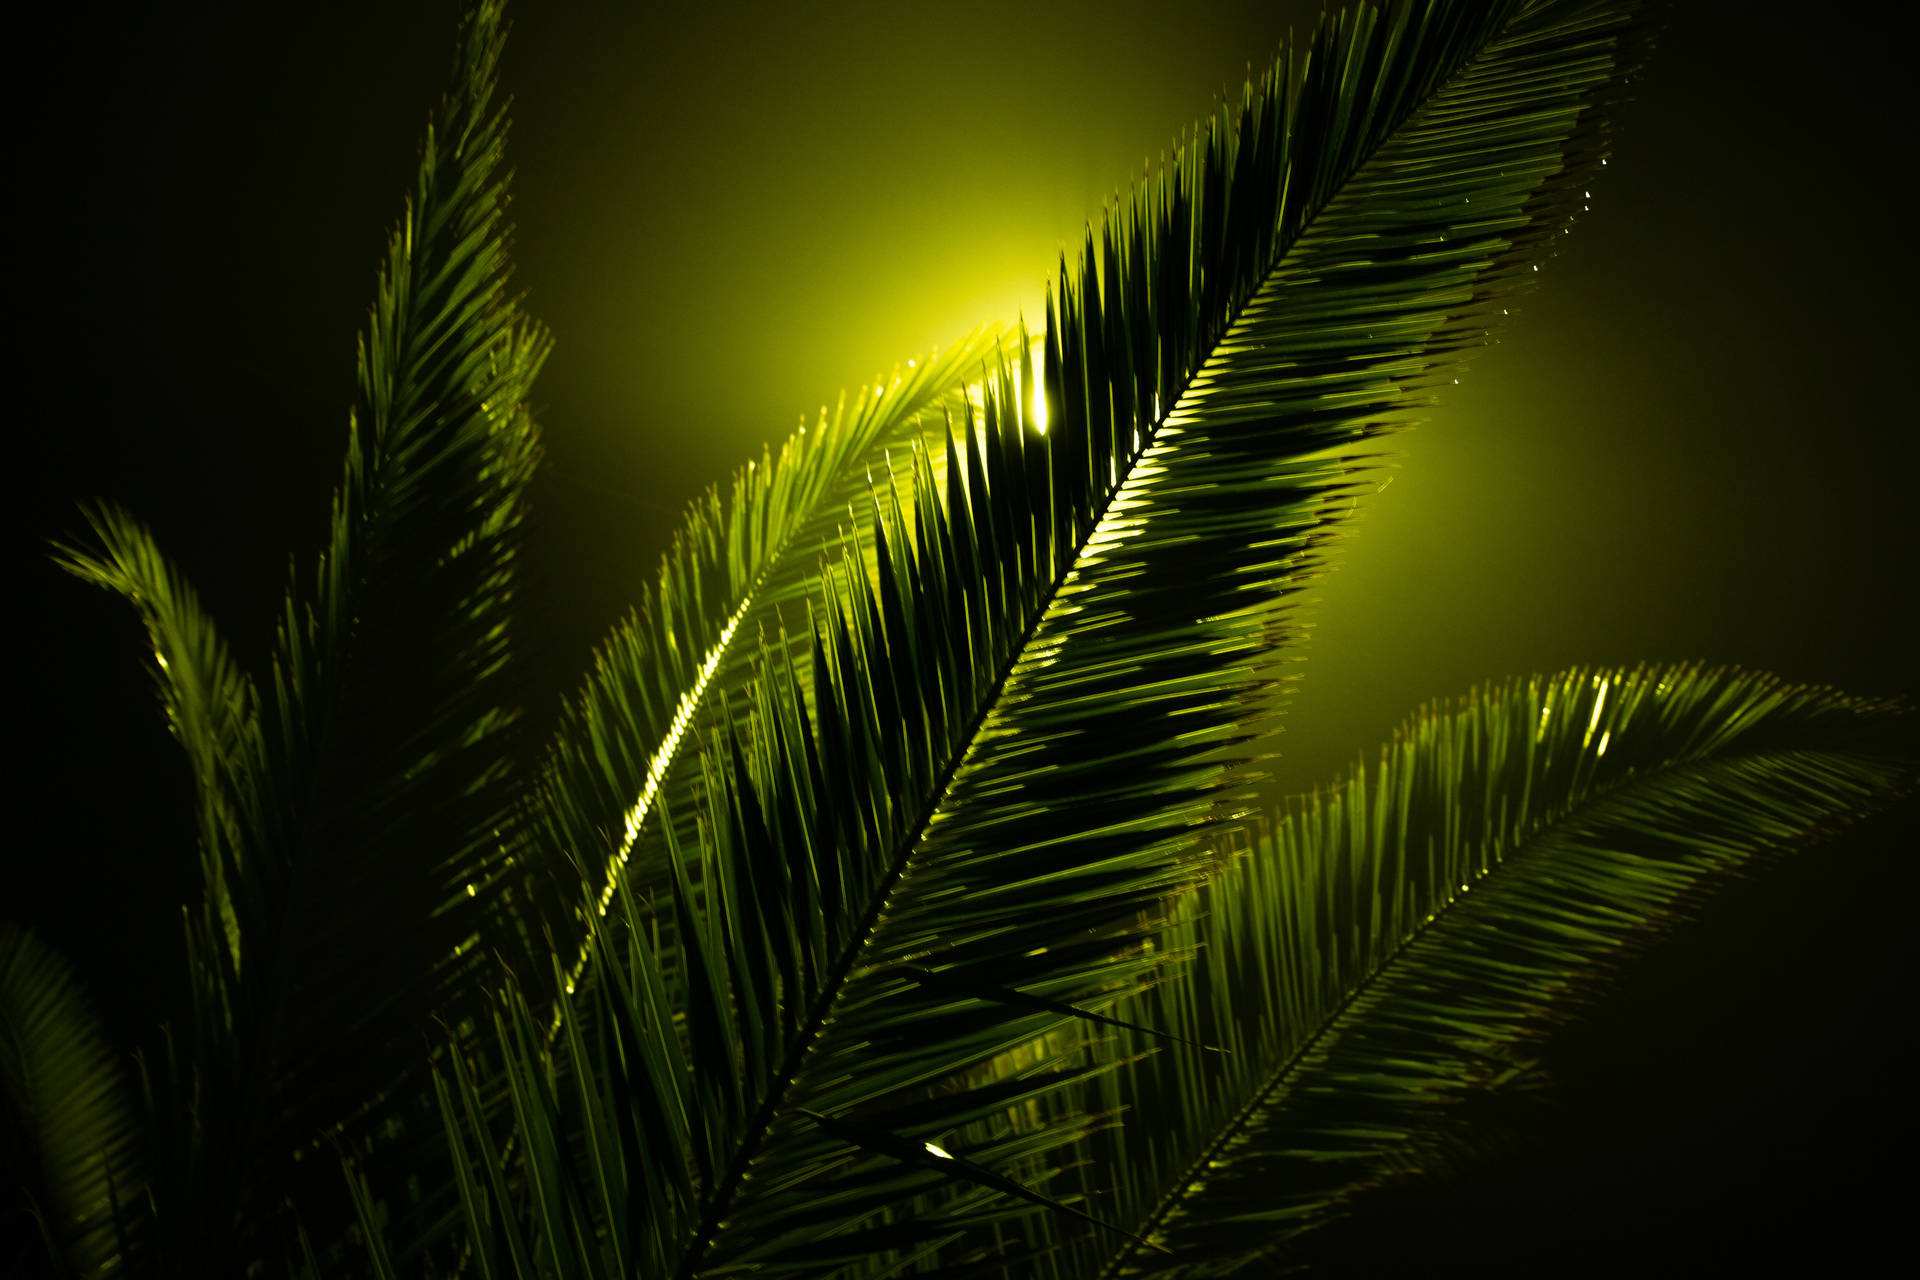 Neon Green 5184X3456 Wallpaper and Background Image